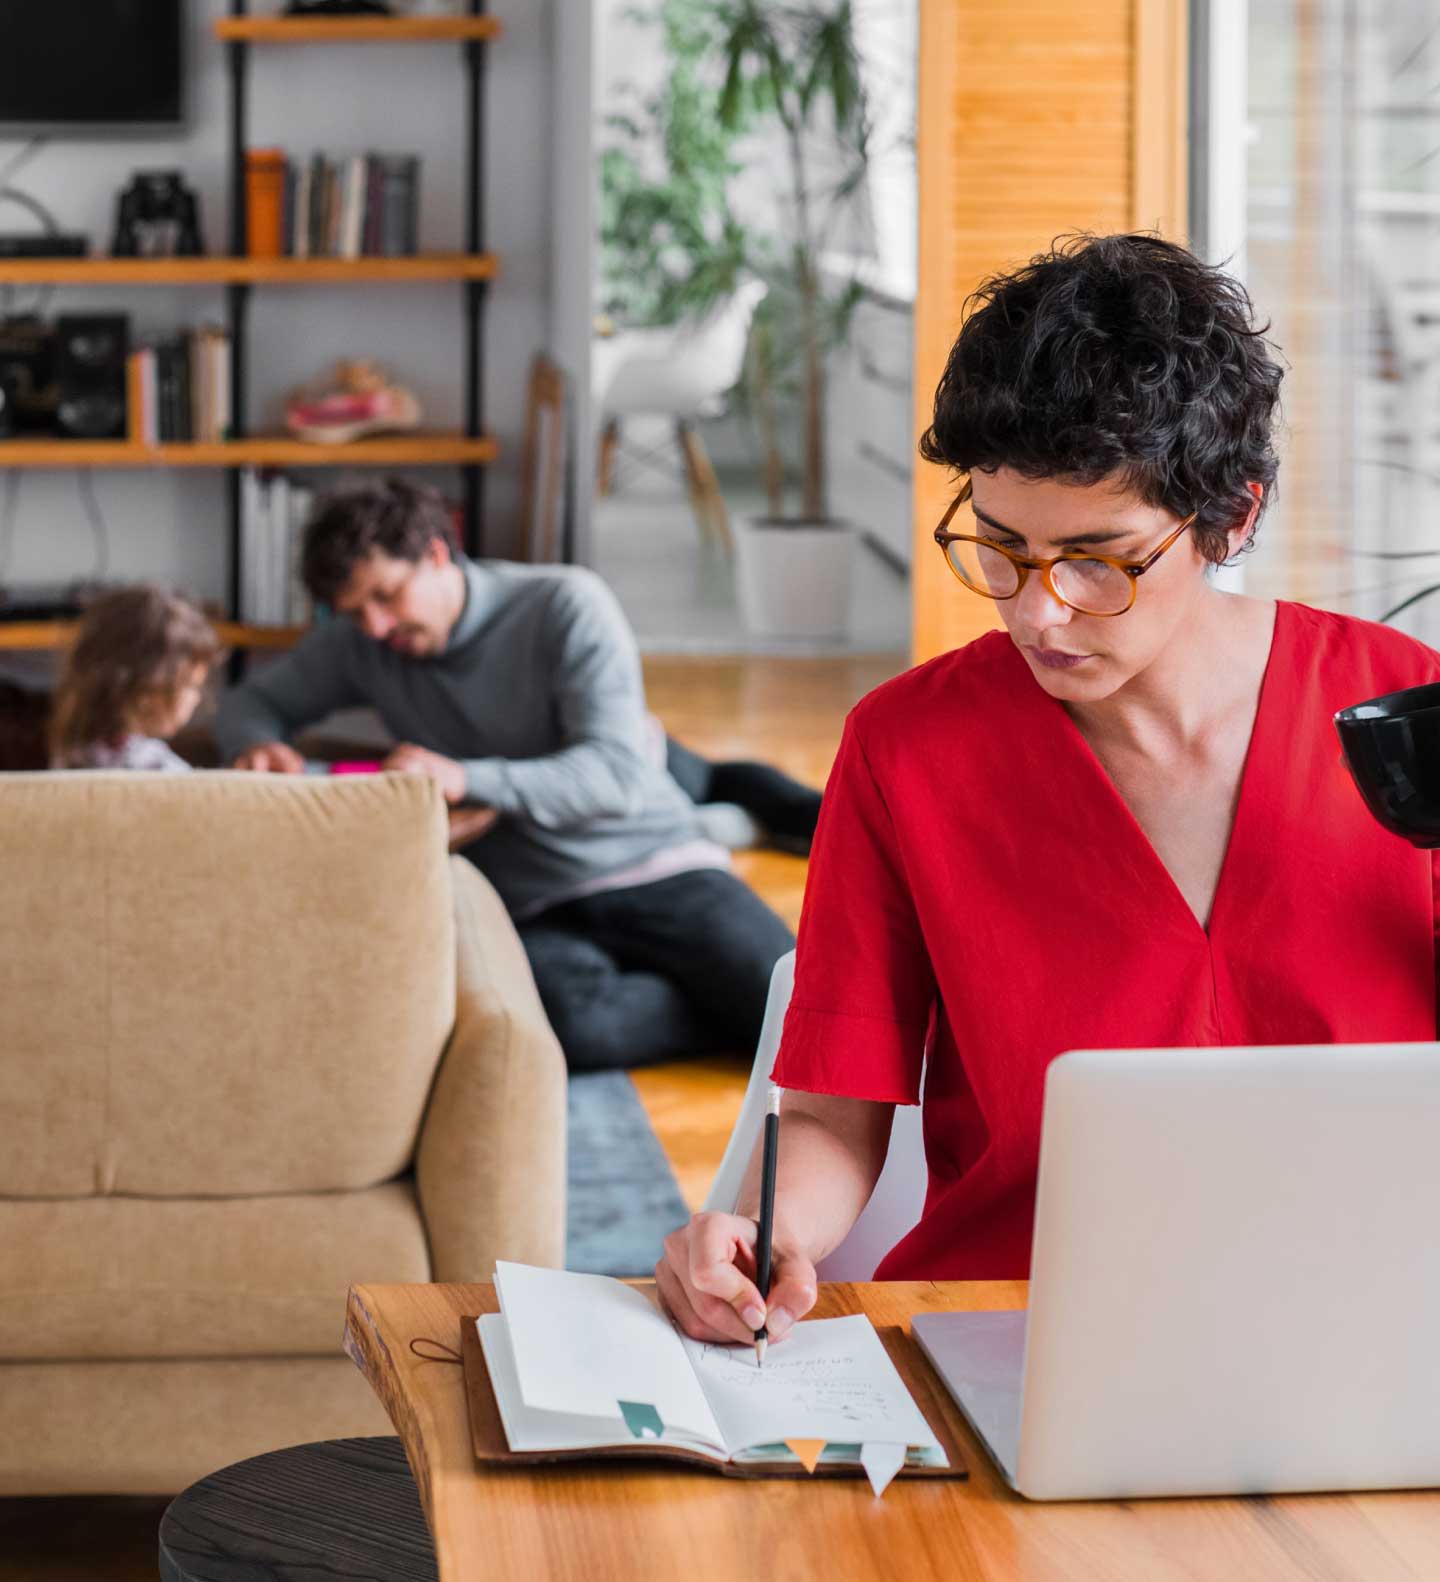 Woman working on laptop in living room with family relaxing behind her 